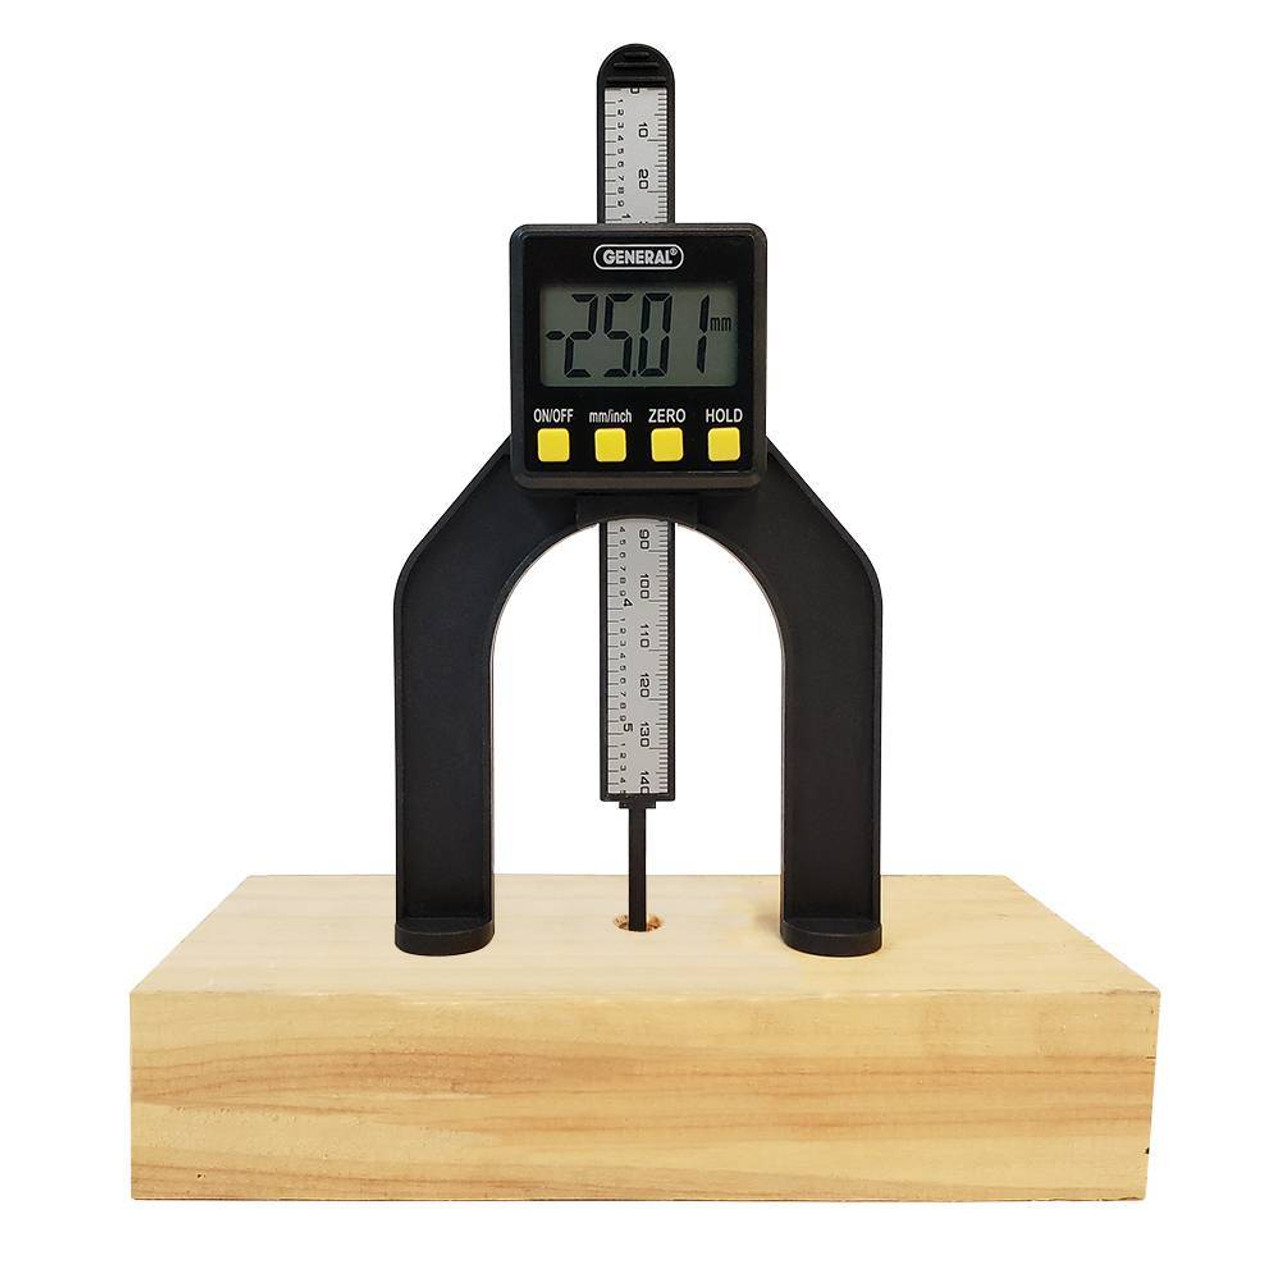 General Digital Height Gauge, Self-Standing, Magnetic,Inches/Millimeters & Detachable Plunger 150